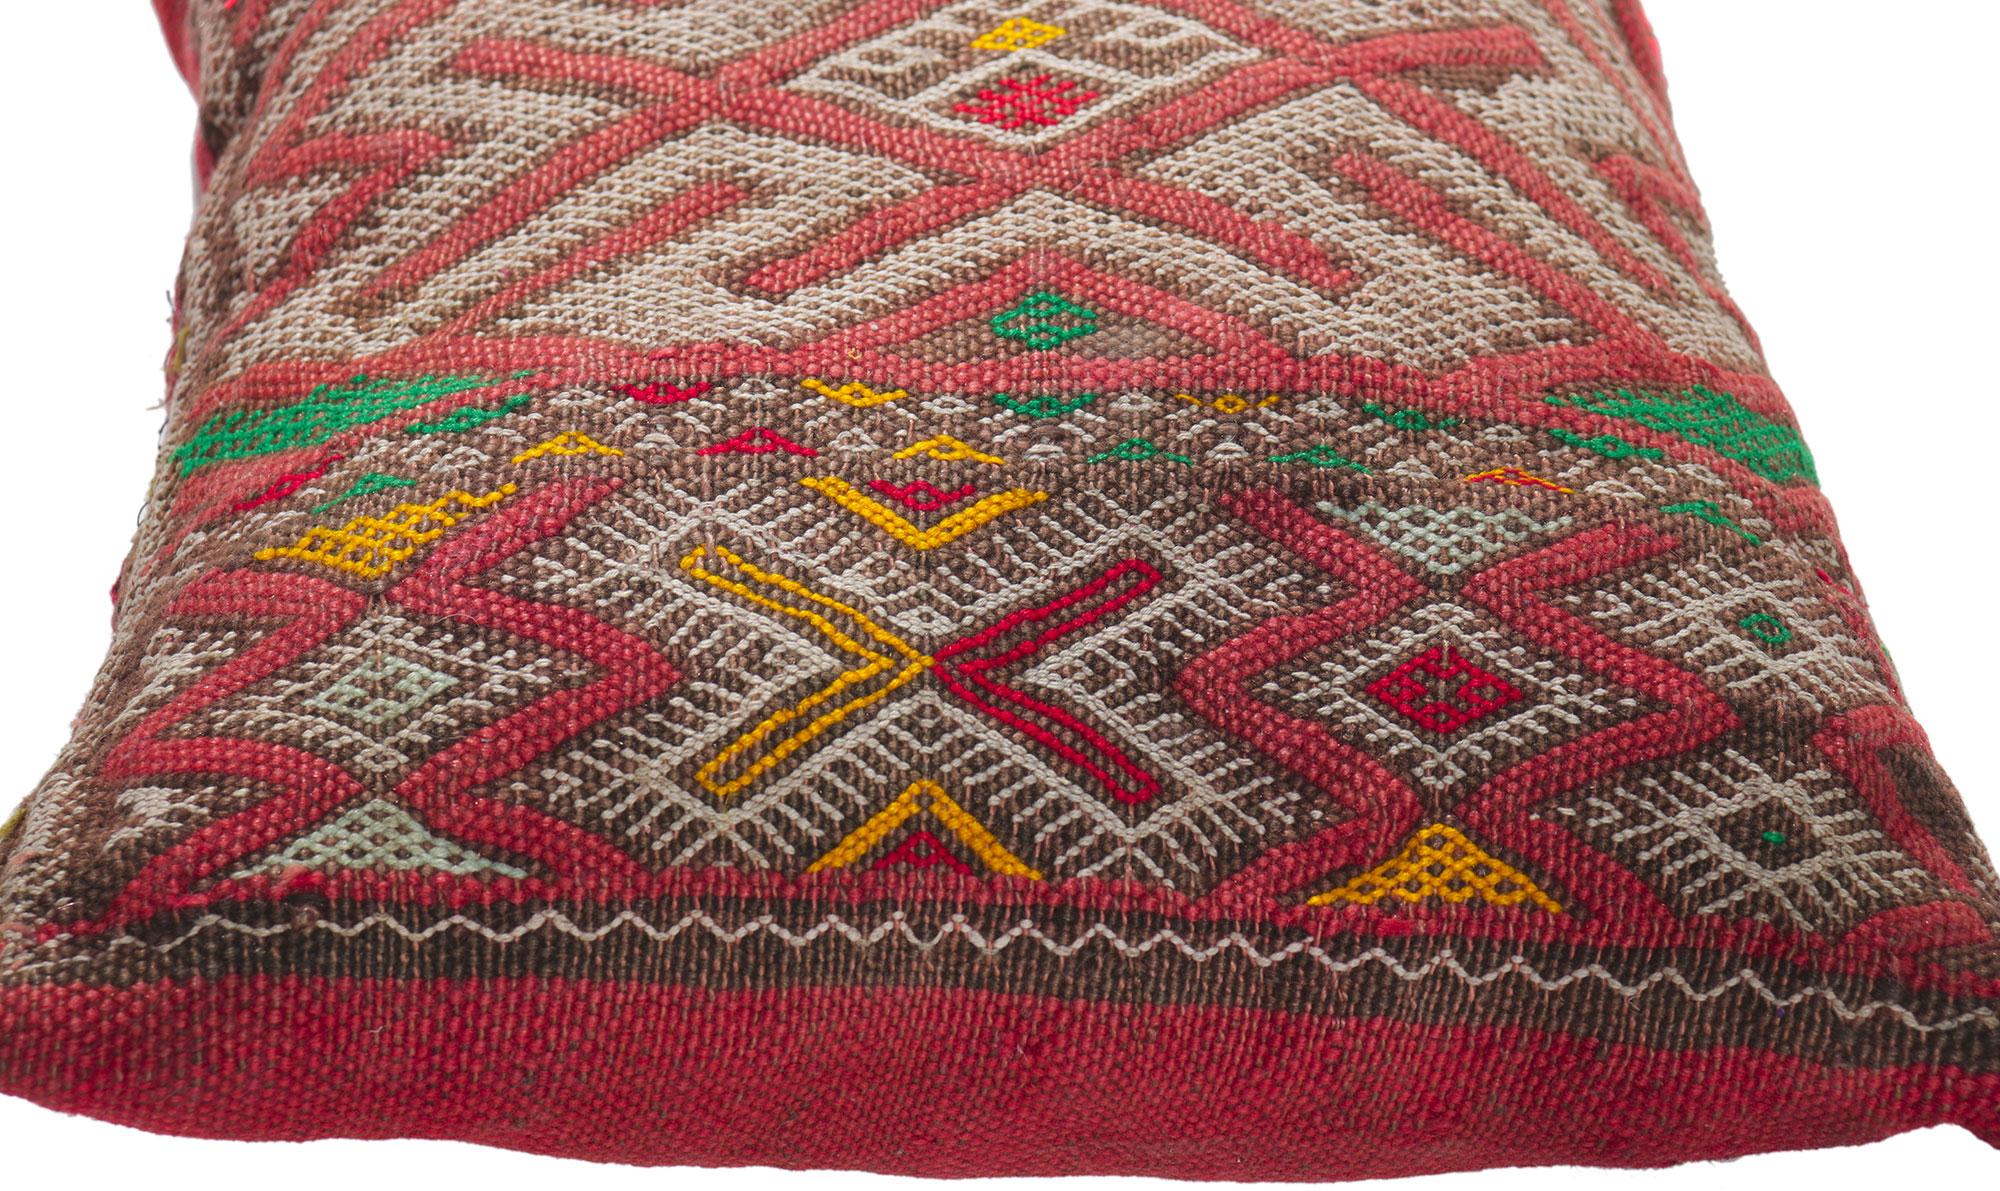 Embroidered Vintage Zemmour Moroccan Rug Pillow by Berber Tribes of Morocco For Sale